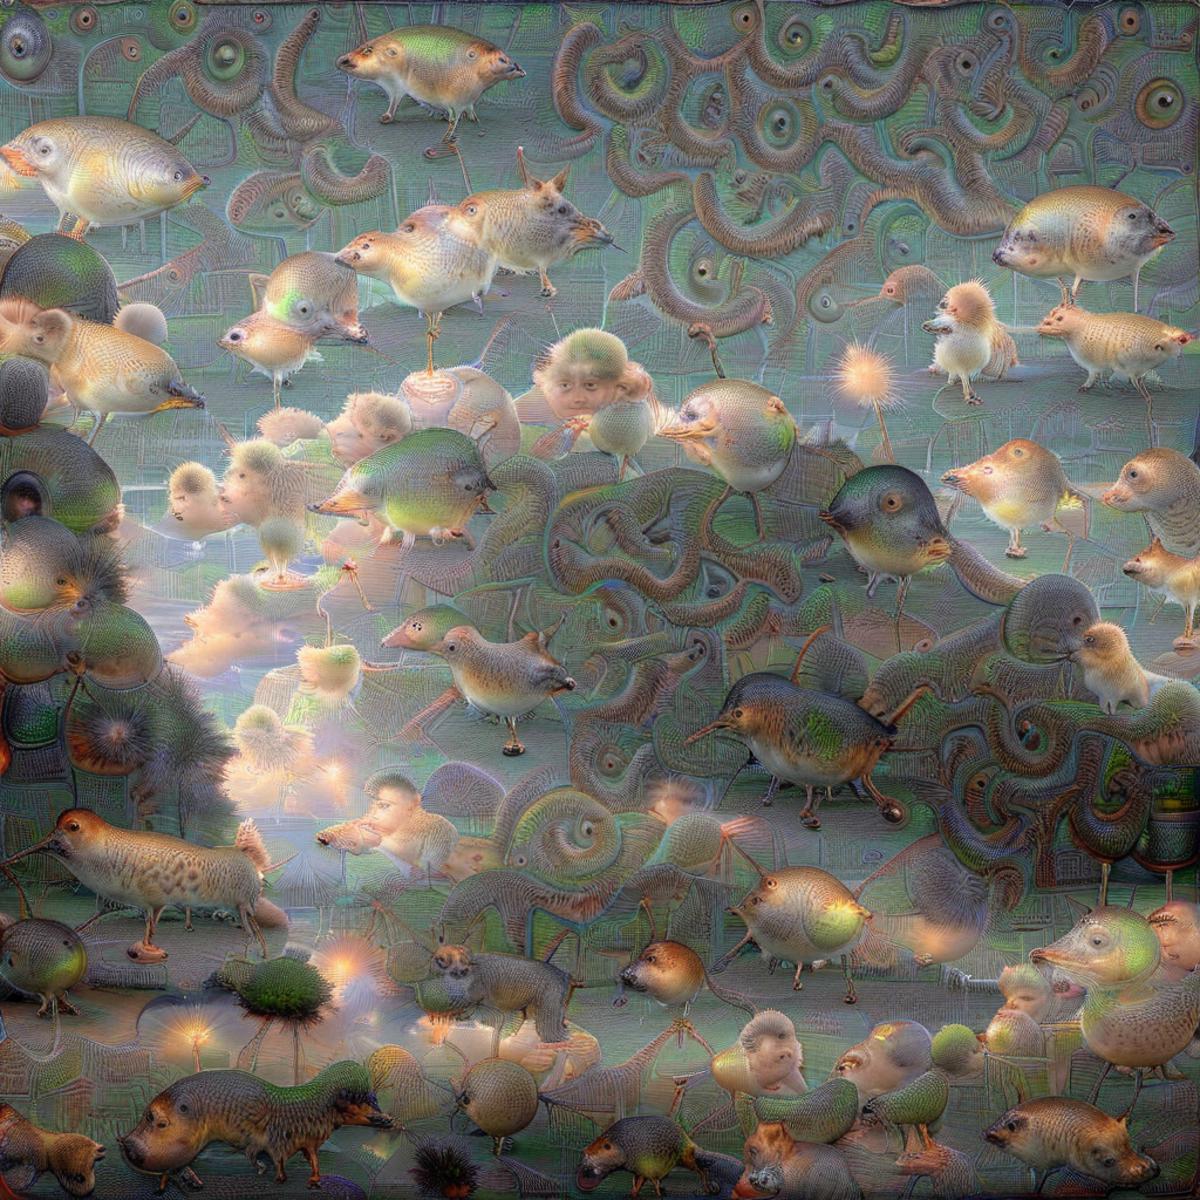 DeepDream2 image by The_one_and_only7723